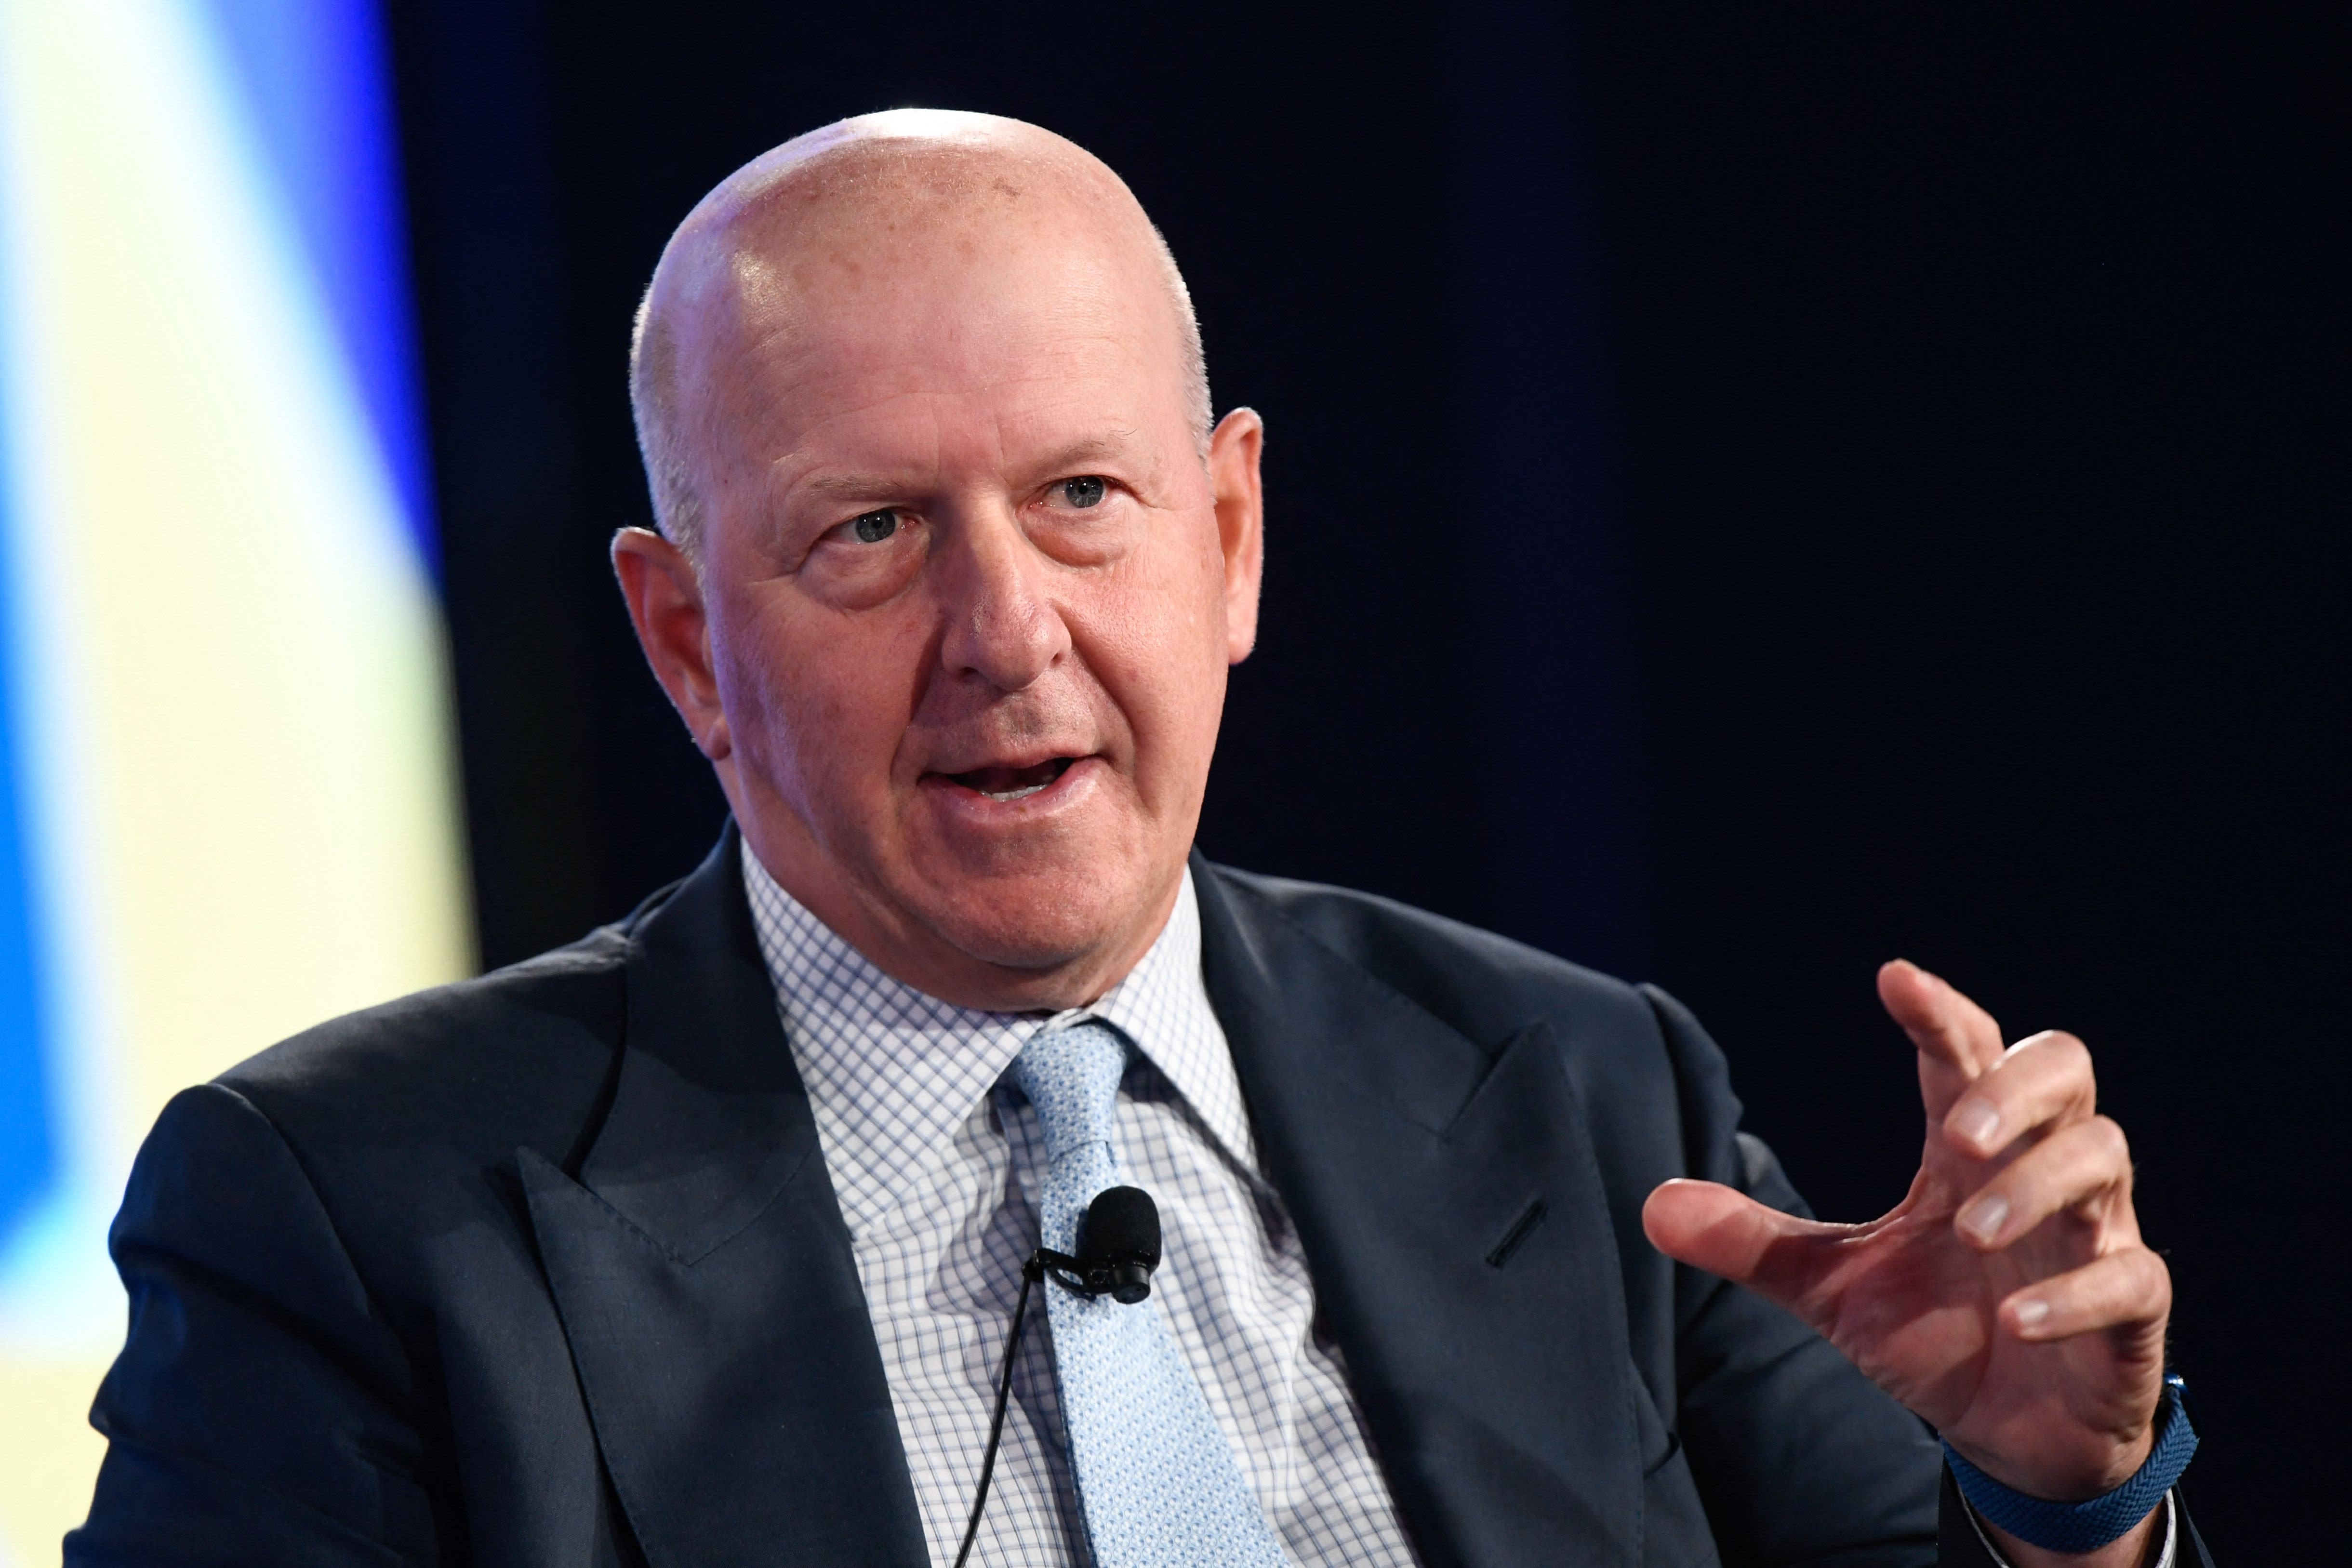 Goldman Sachs CEO David Solomon Expects a ‘Strong Landing’ of US Economy